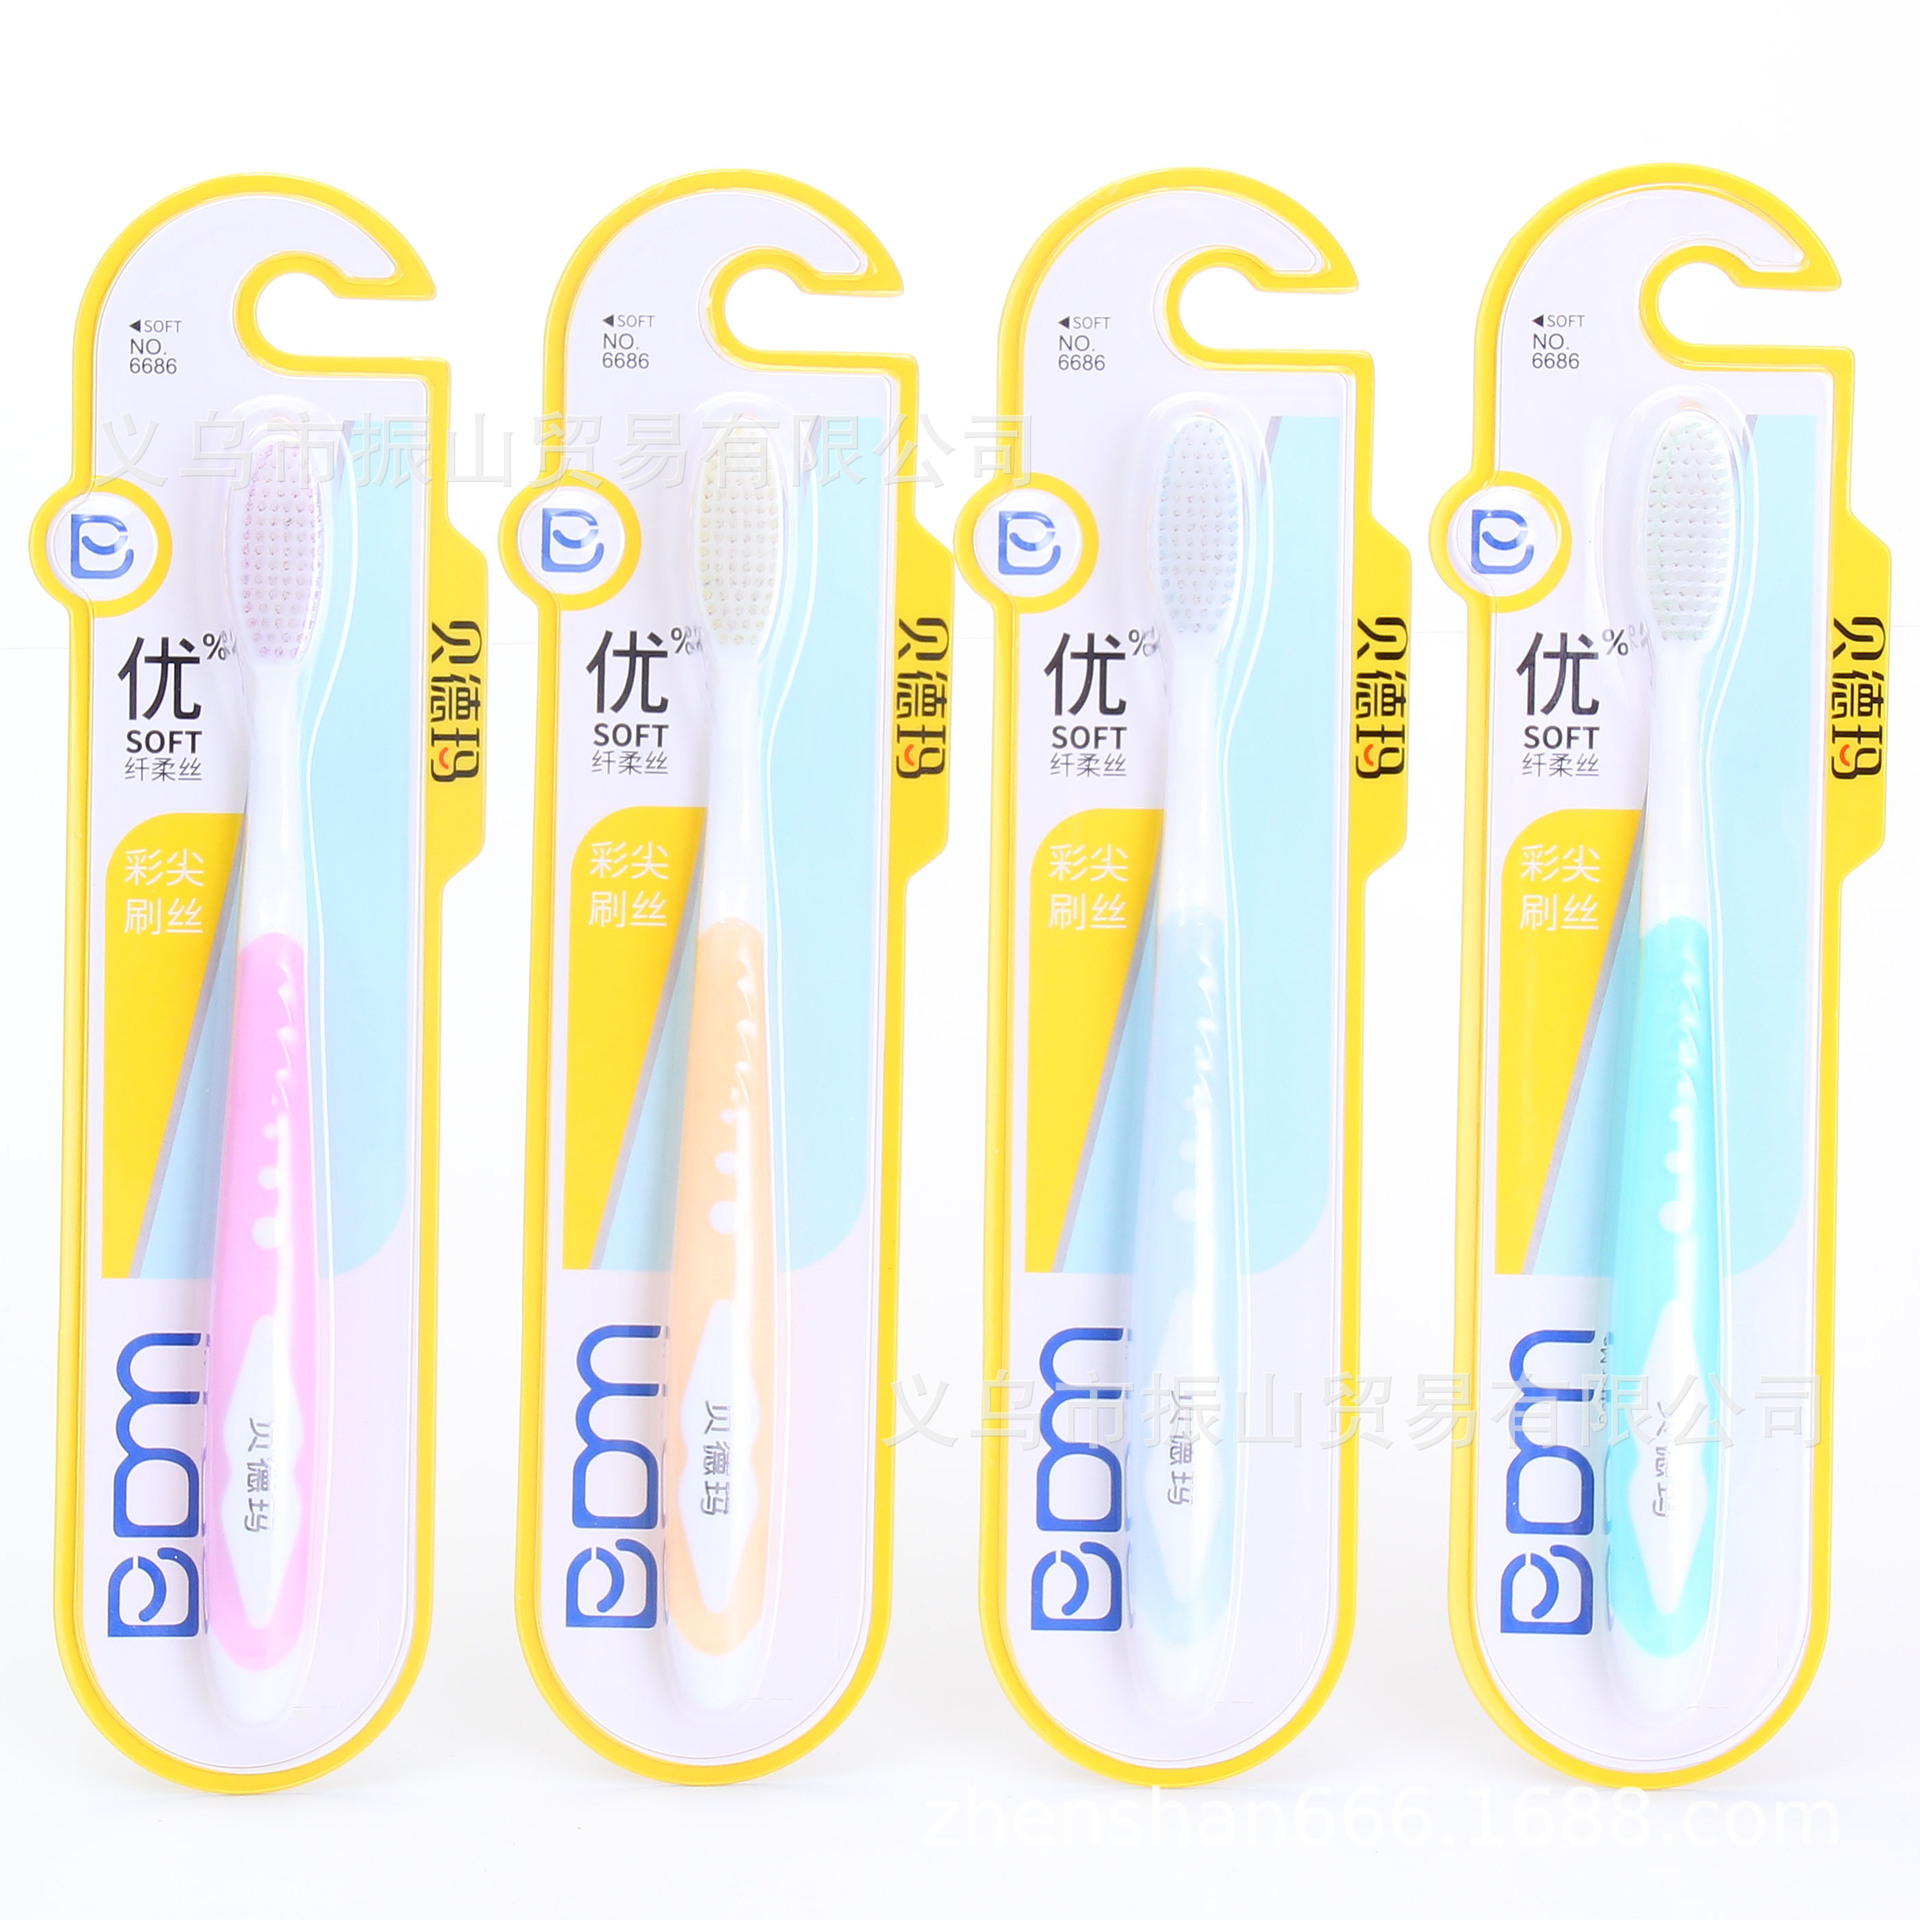 Bdm6686 WeChat Hot-Selling Toothbrush Handle Color Tip Bristle Suitable Grip Toothbrush Handle Soft-Bristle Toothbrush